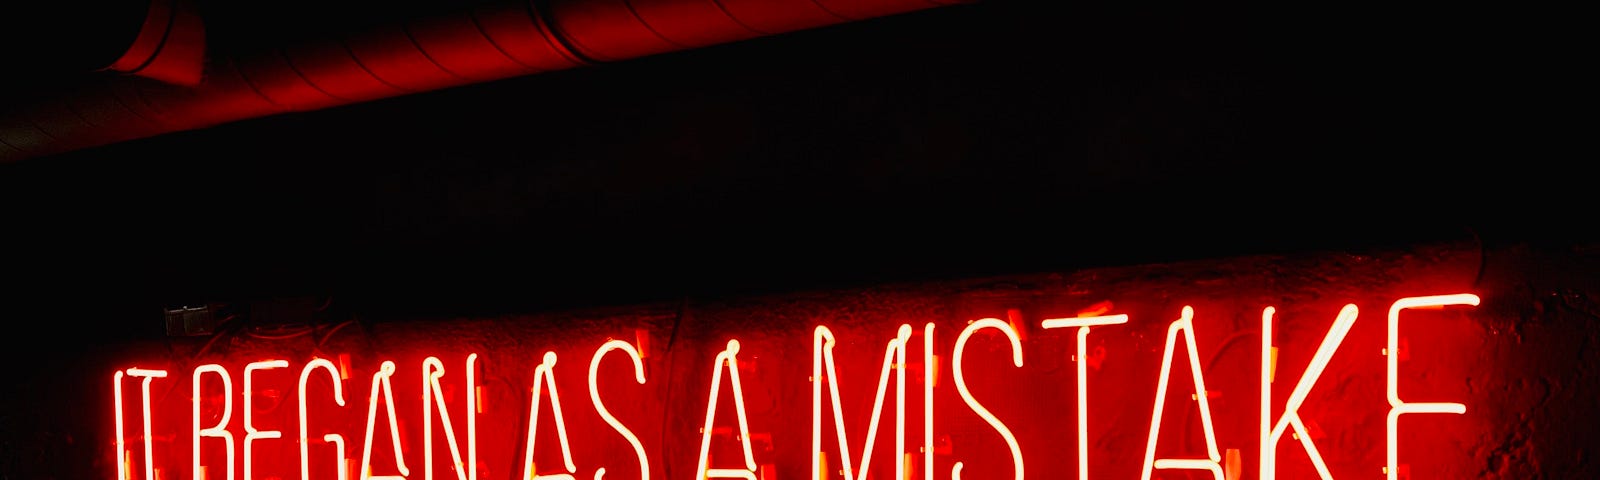 Red neon sign that reads “IT BEGAN AS A MISTAKE”.